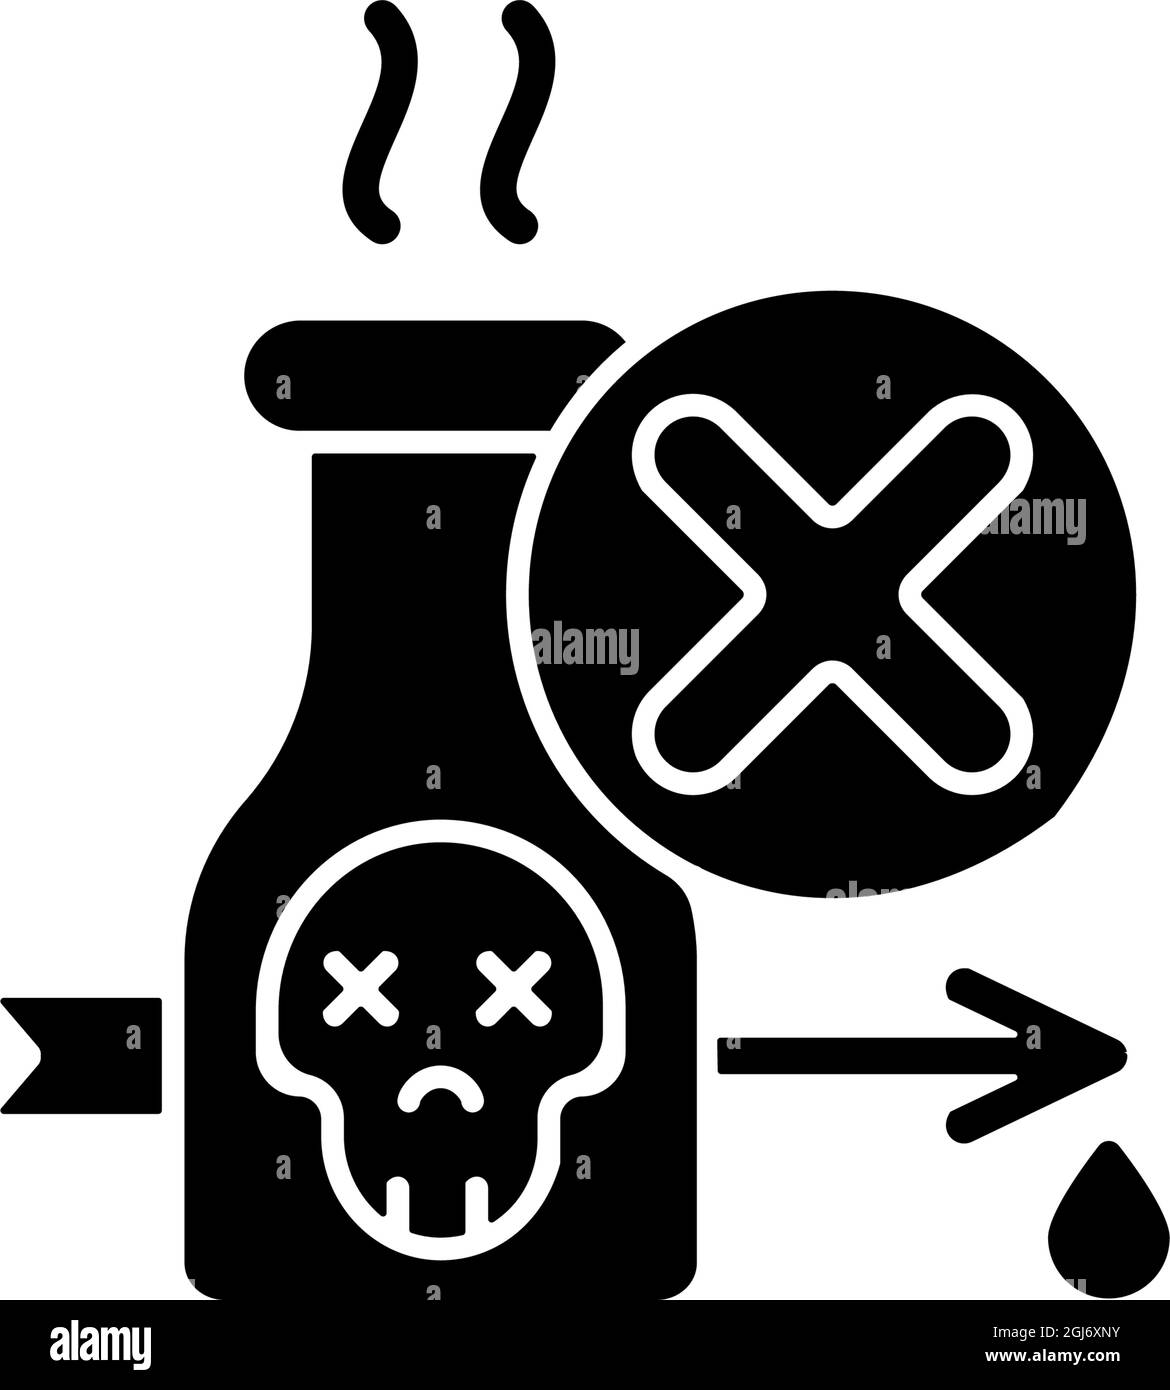 Illegal poison hunting black glyph icon Stock Vector